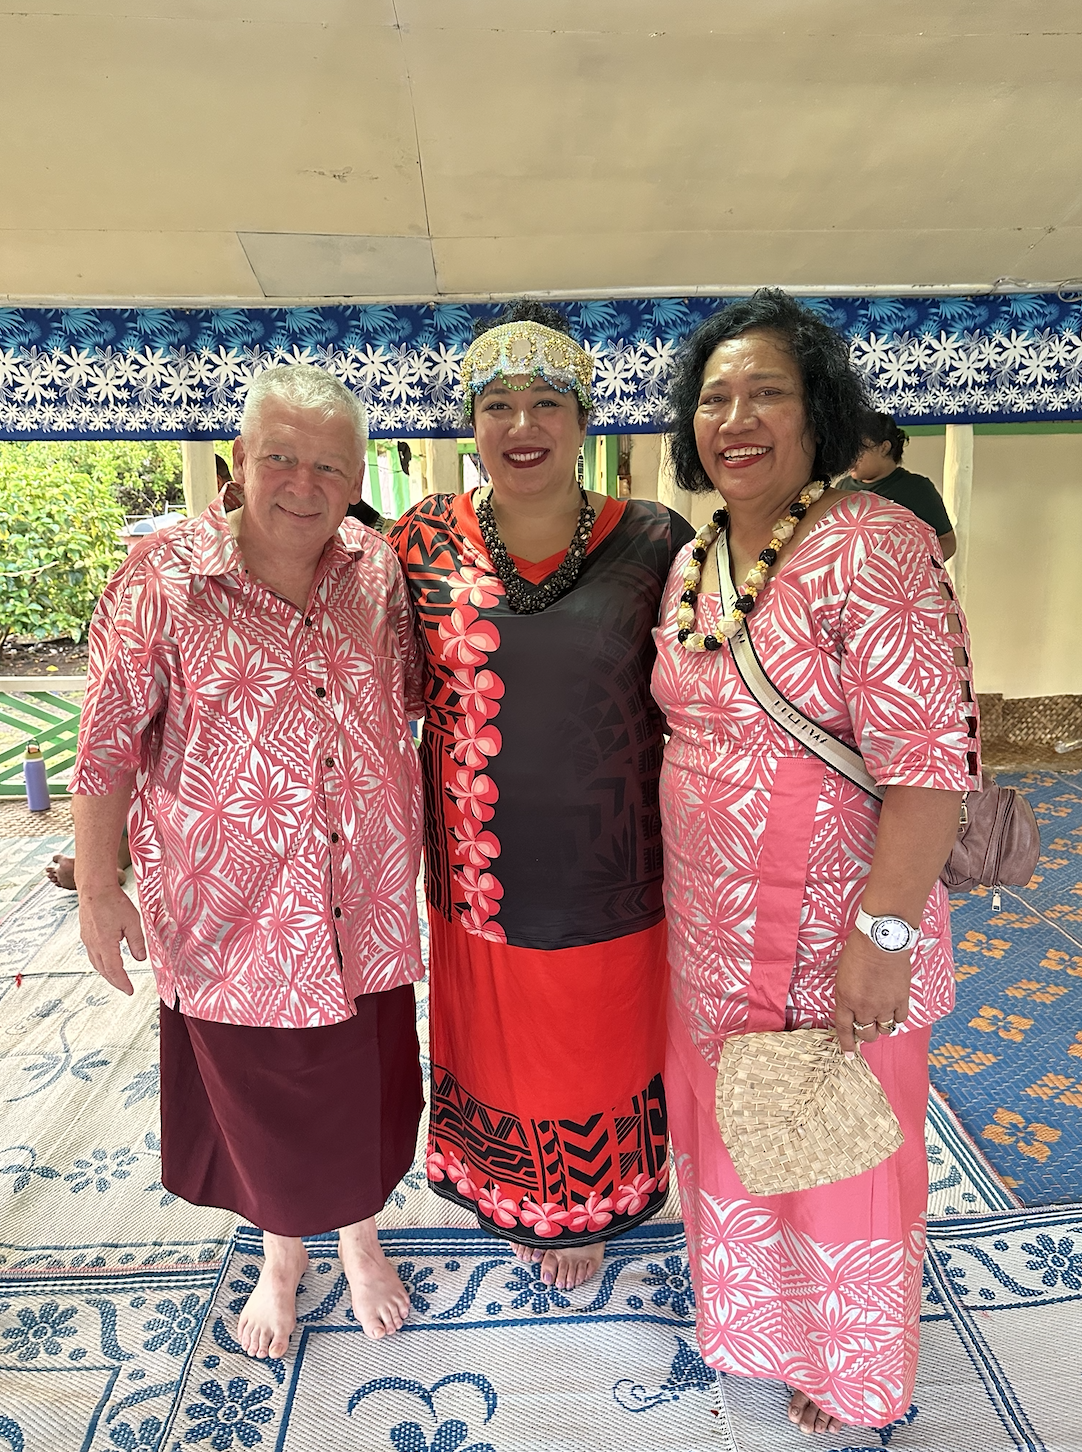 Three people in traditional Polynesian attire are smiling and standing together in a room with patterned decor